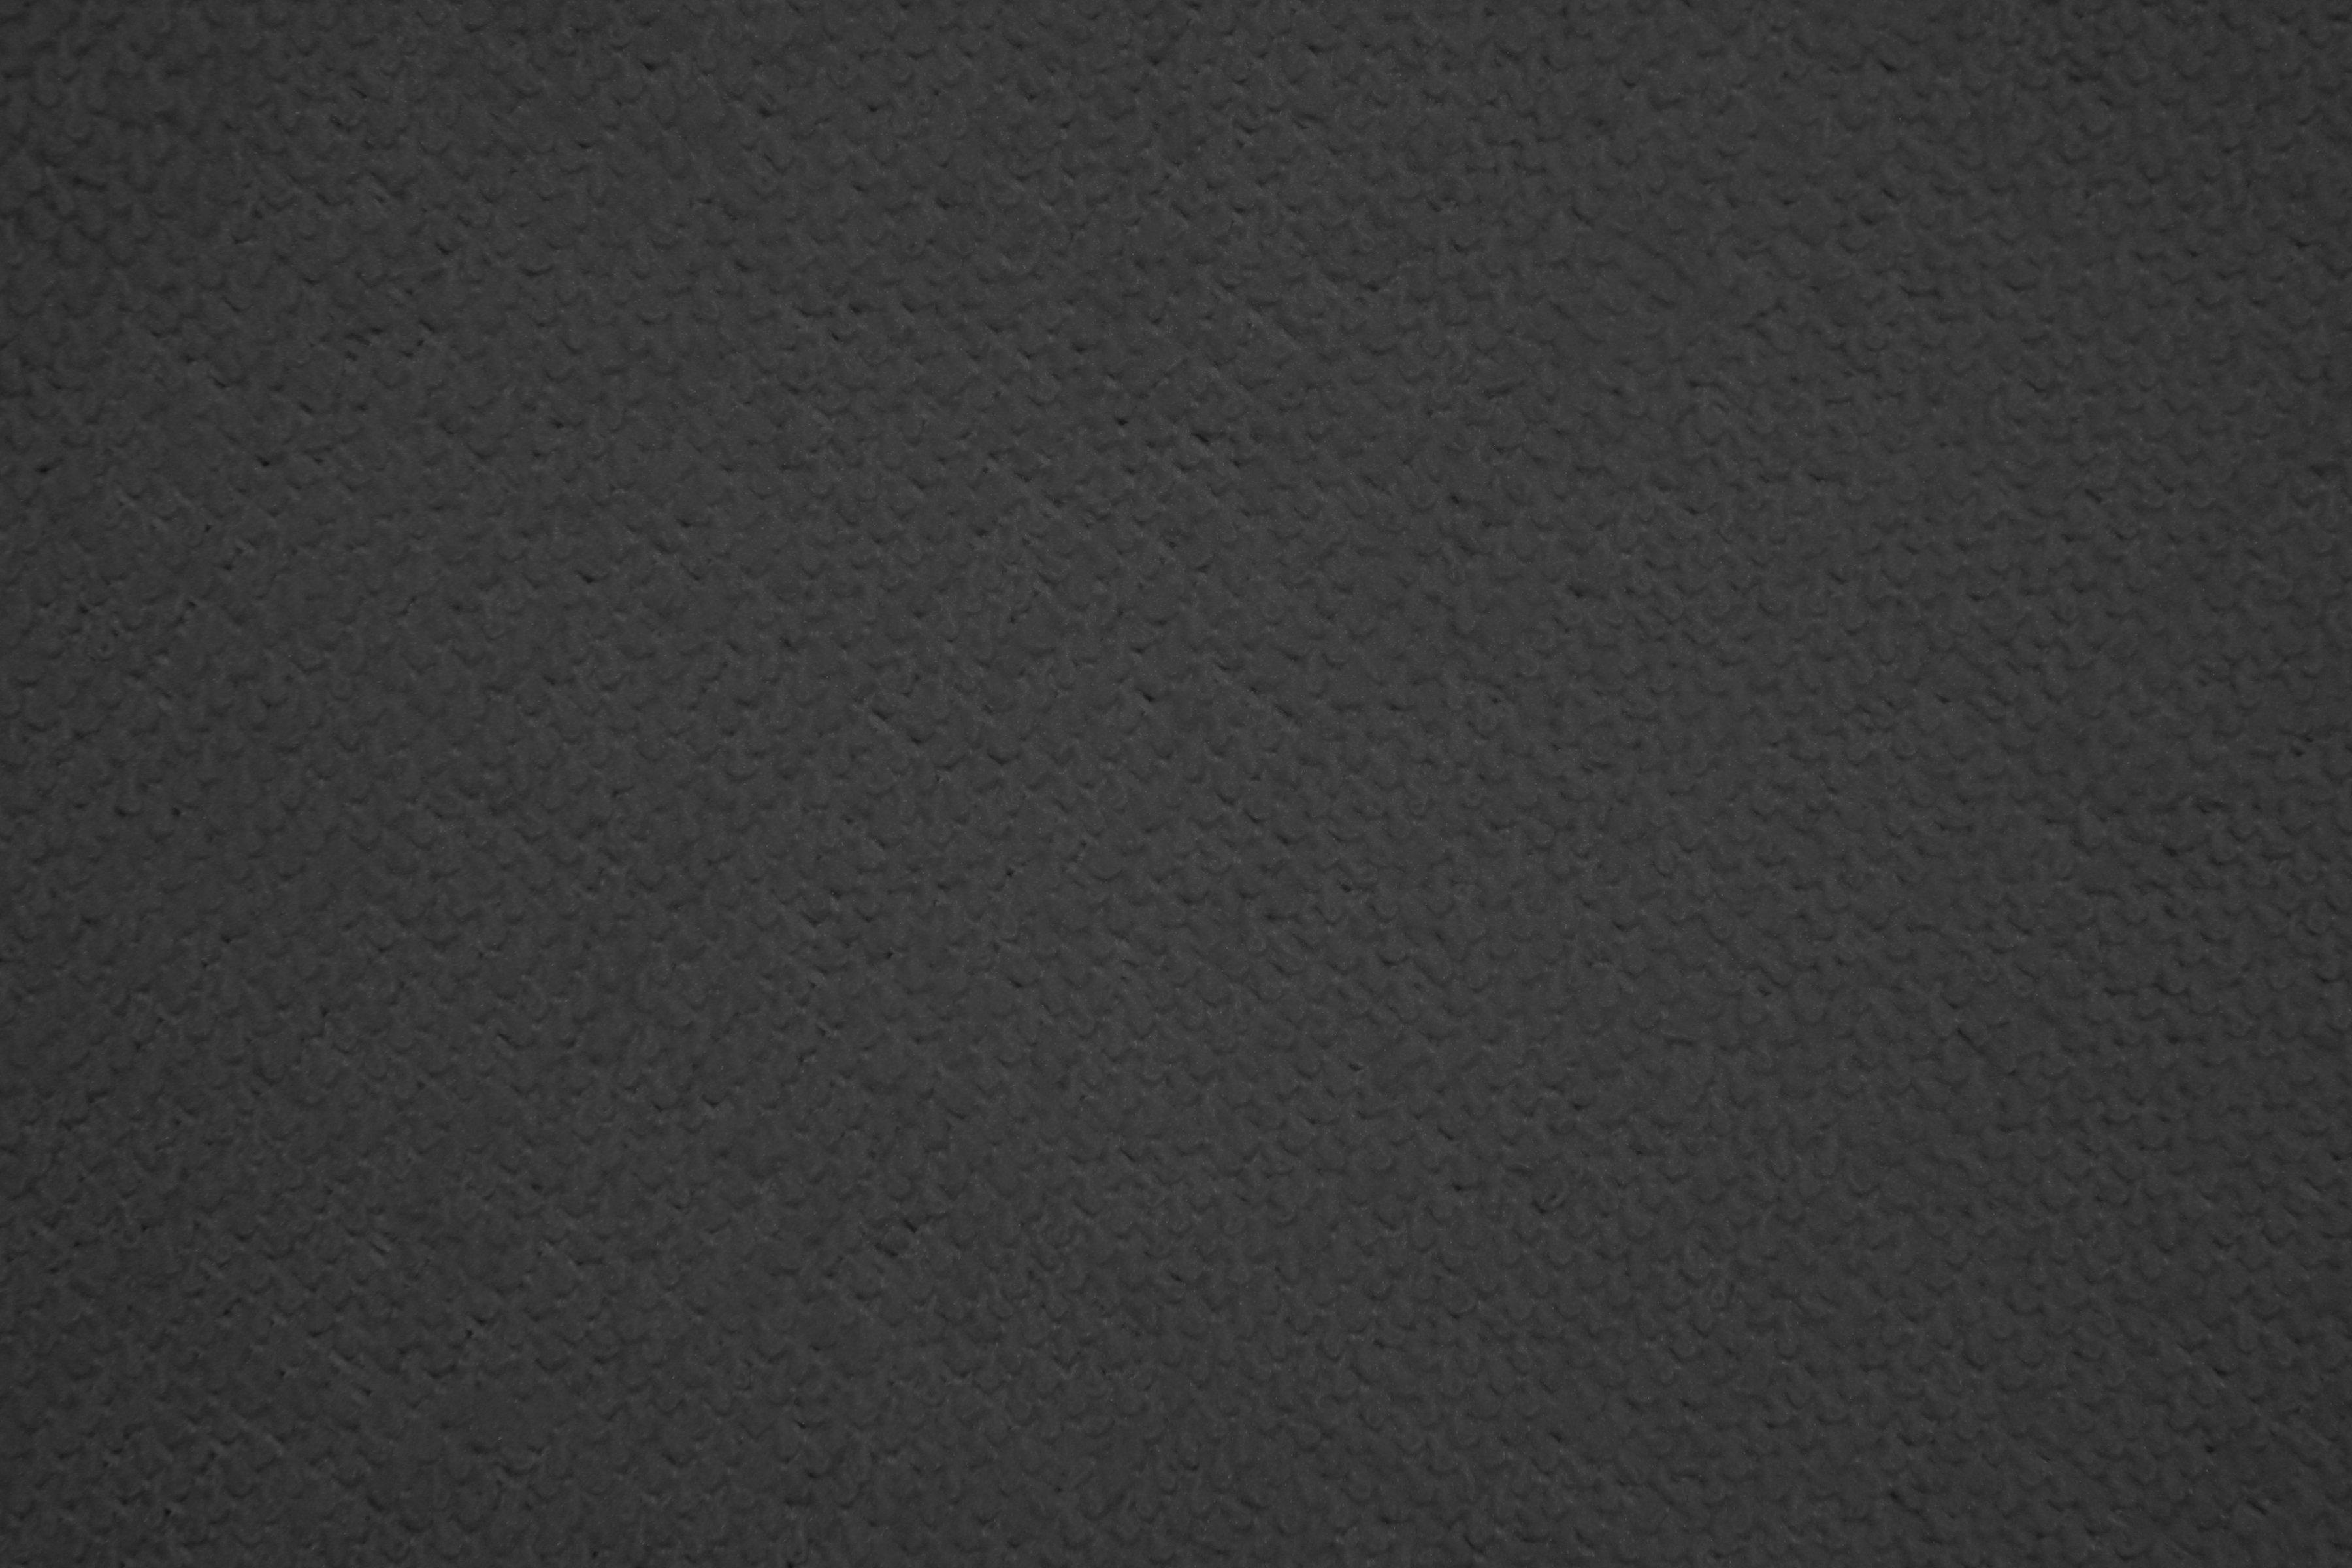 Charcoal Gray Microfiber Cloth Fabric Texture Picture, Free Photograph